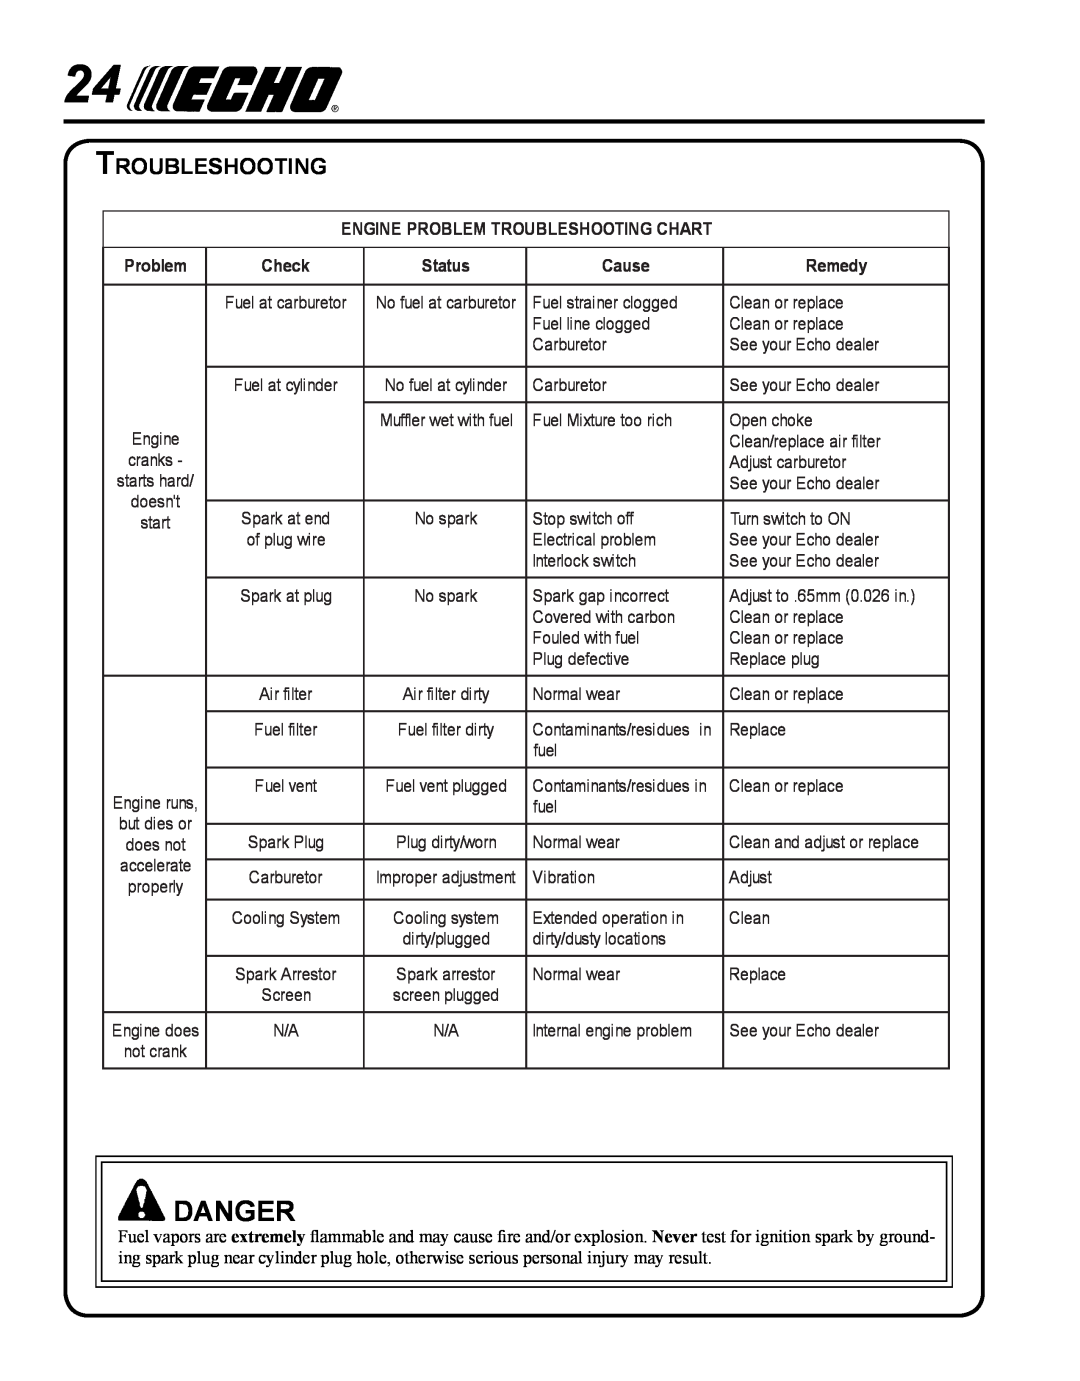 Echo PE-225 manual Danger, Troubleshooting, EnginE PrOBLEM TrOUBLESHOOTing CHarT, Problem, Check, Status, Cause, remedy 